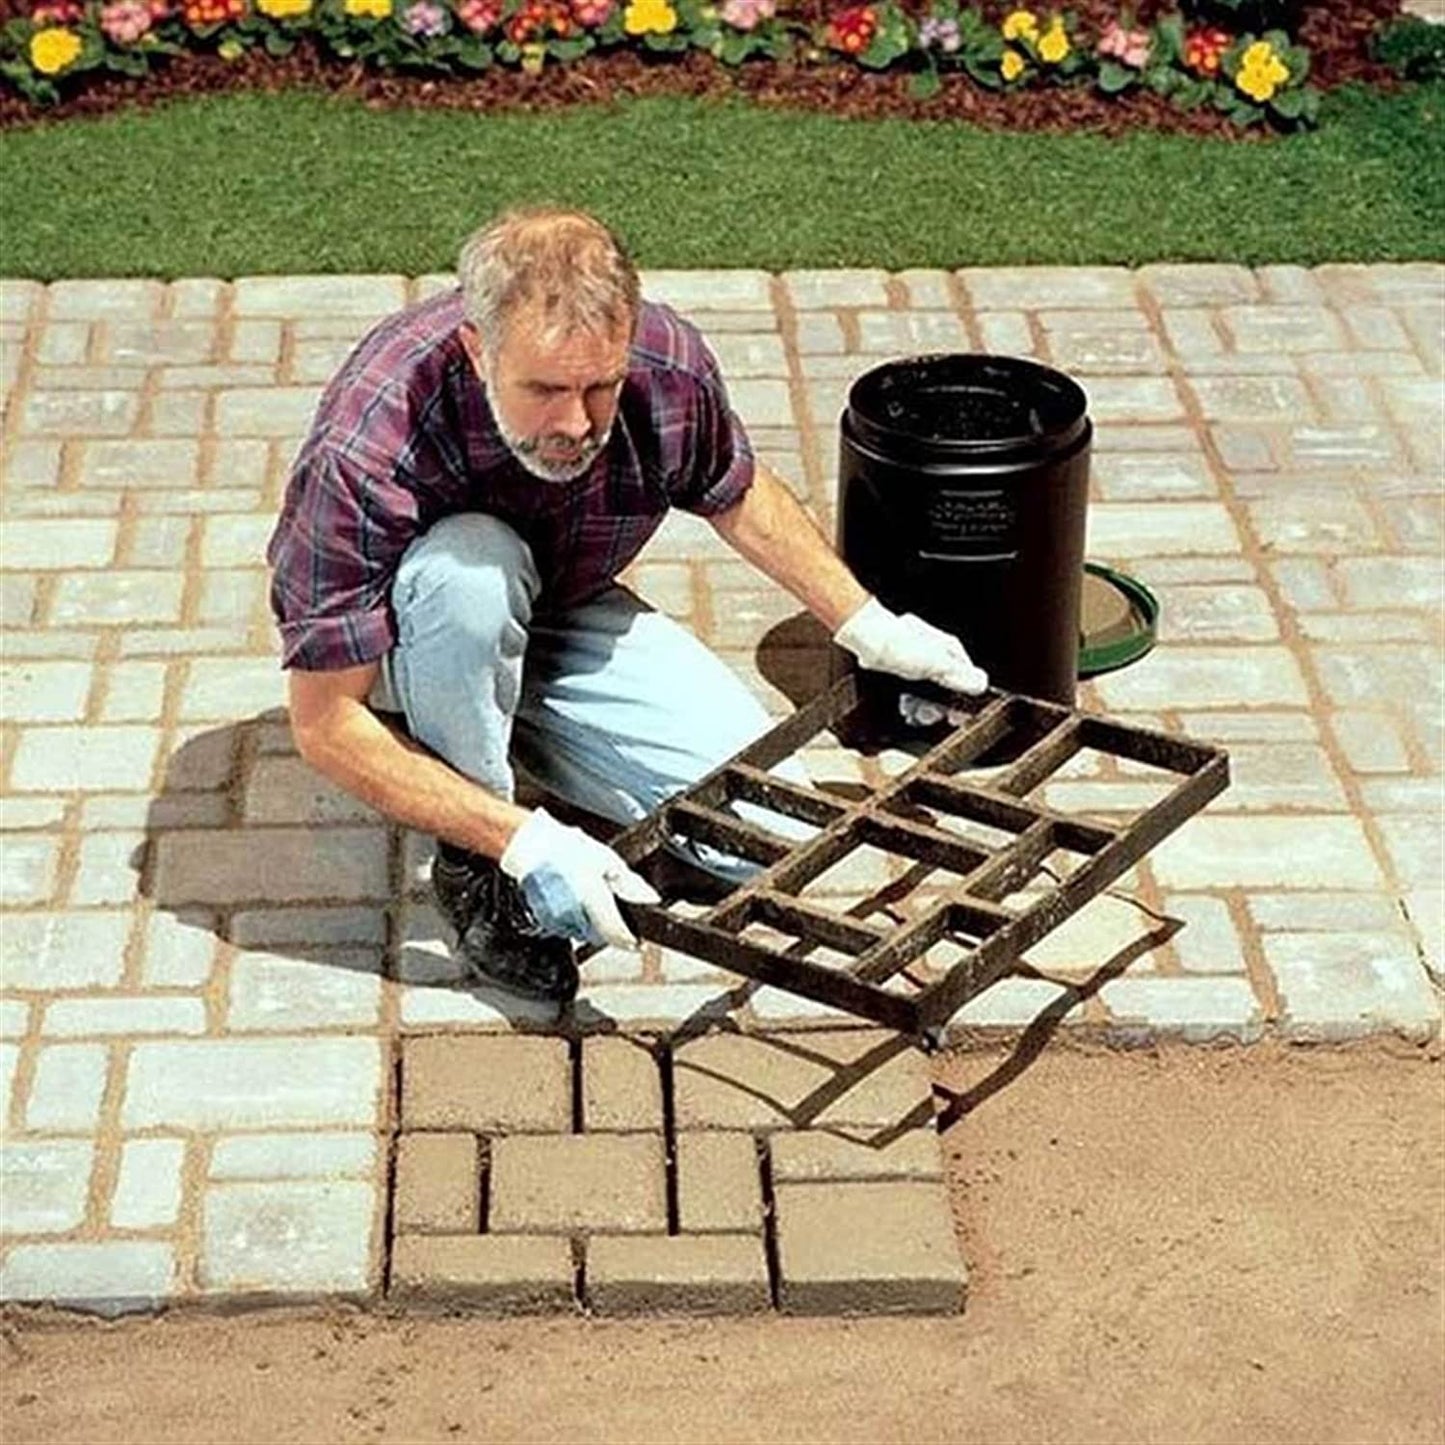 Create Your Own Unique Path with DIY Floor Mould